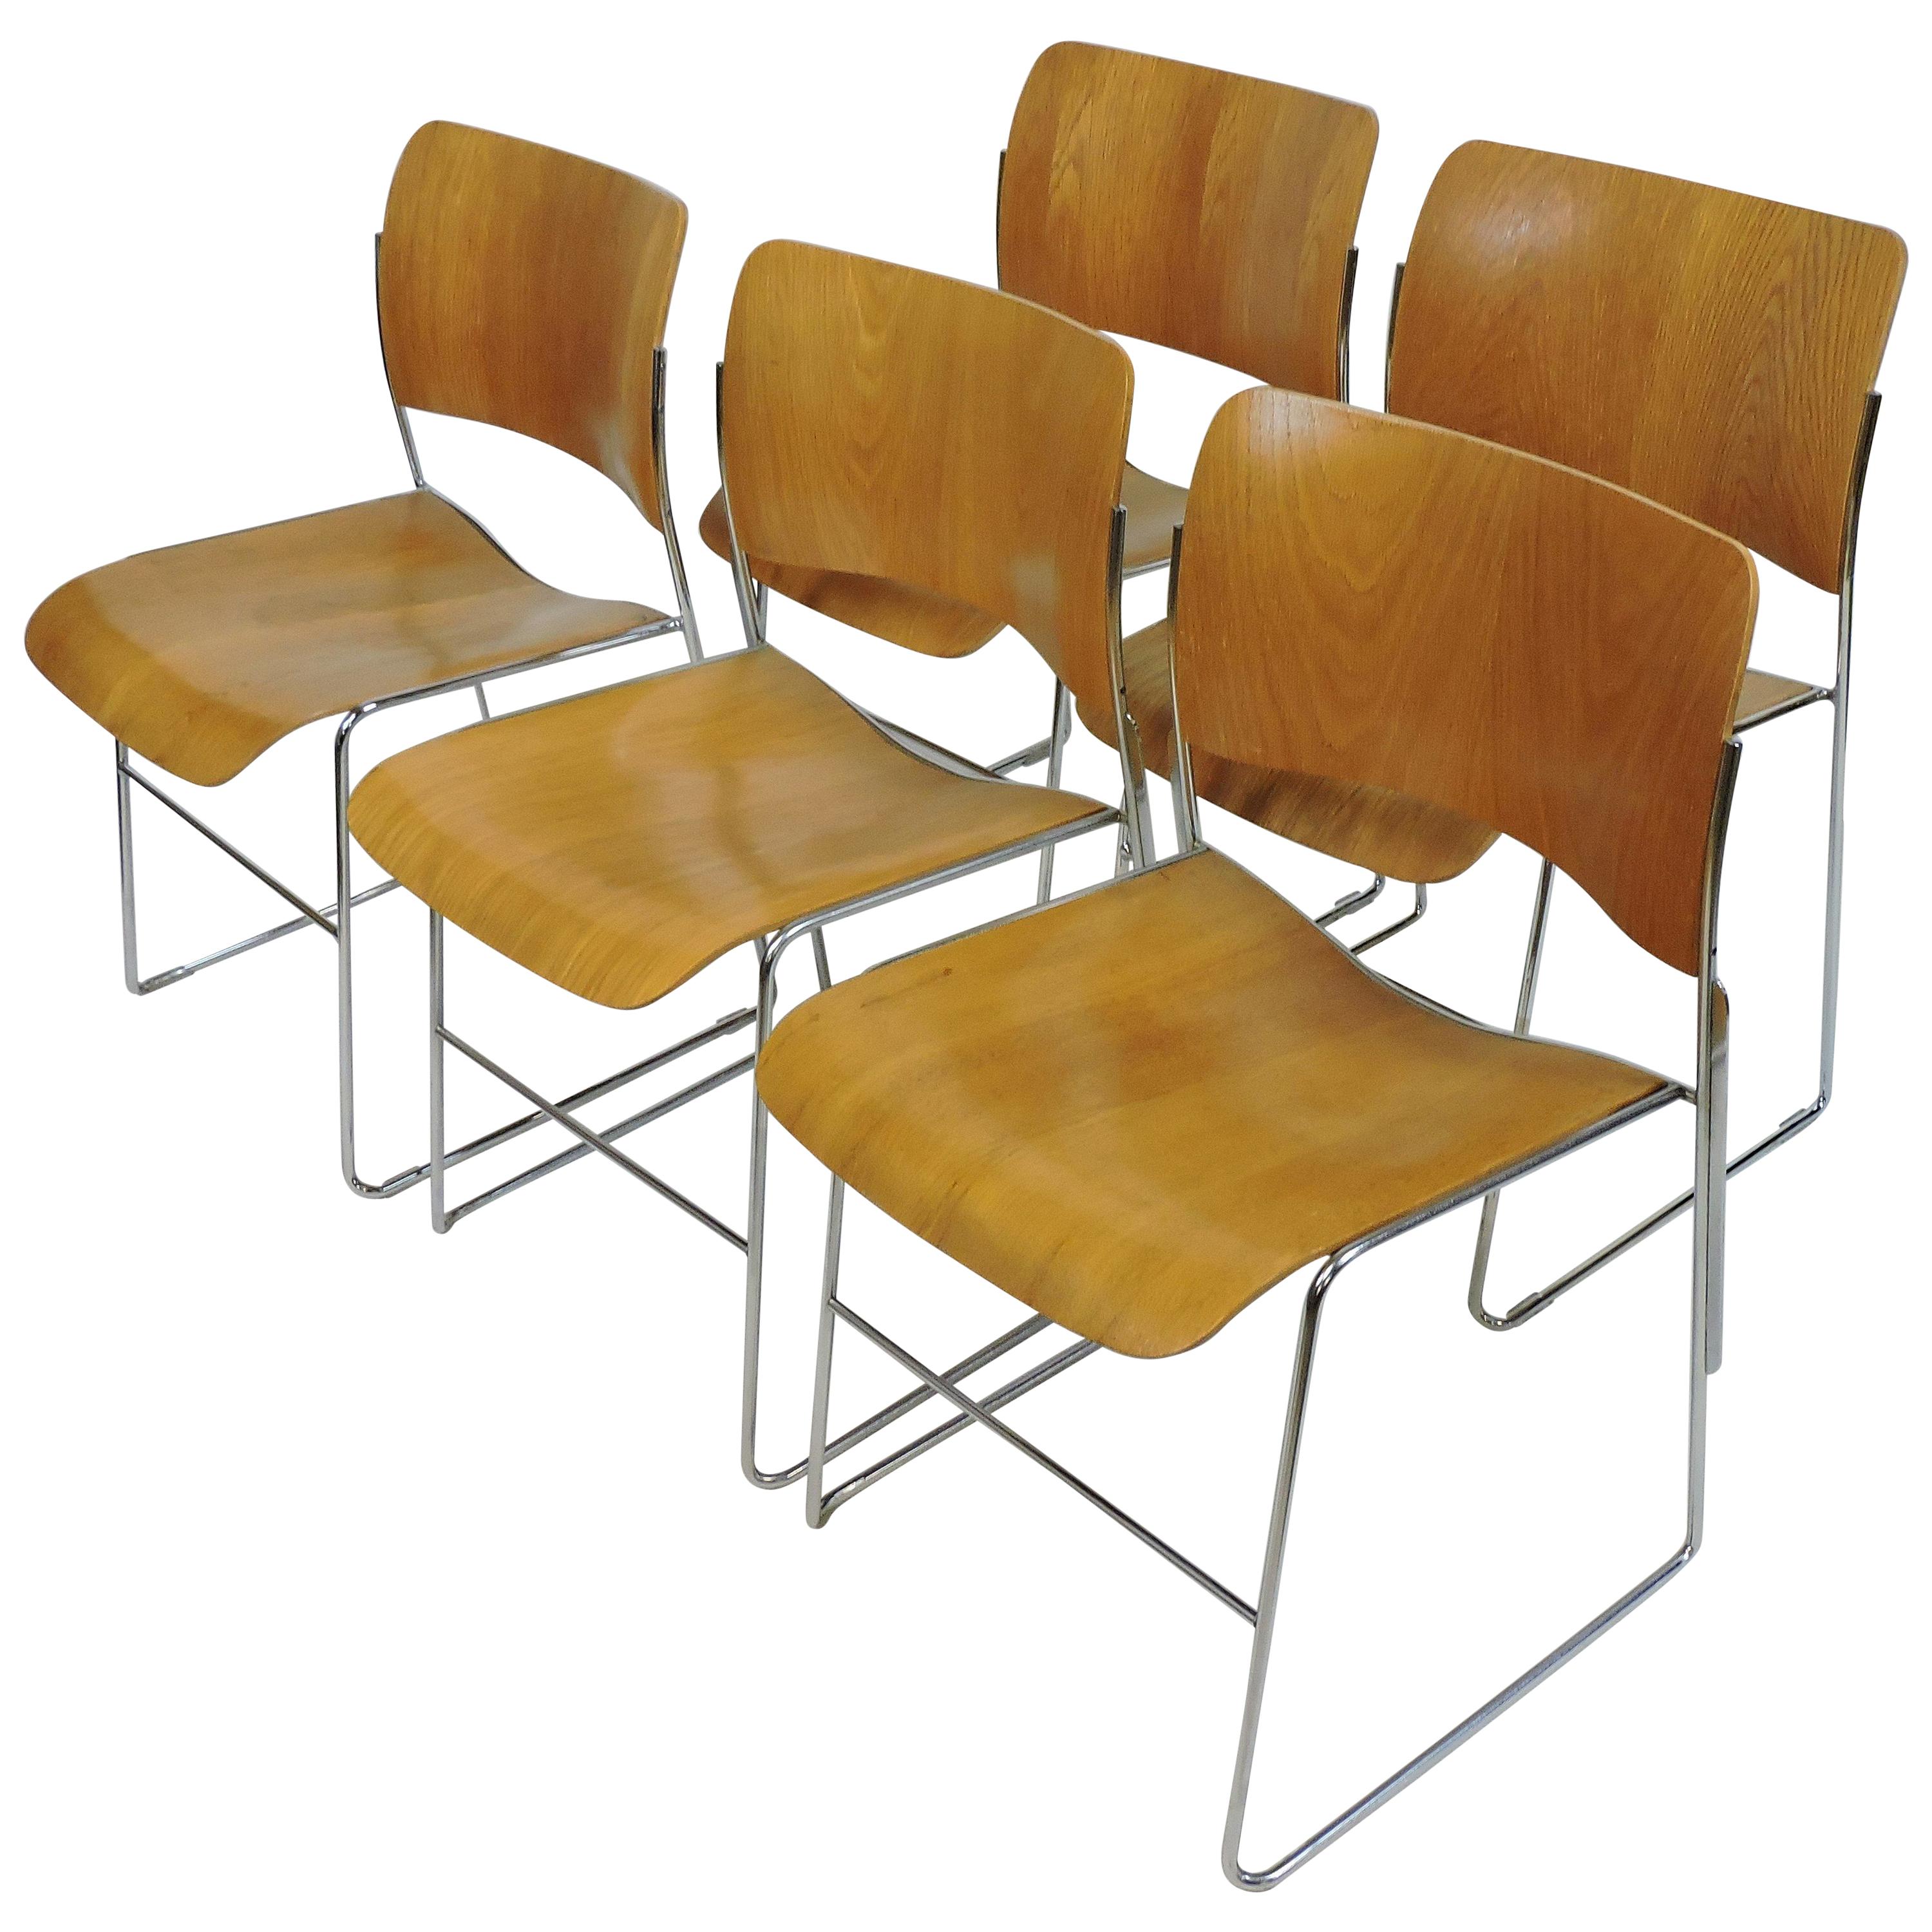 David Rowland 40/4 Mid-Century Modern Bentwood Stackable Chair